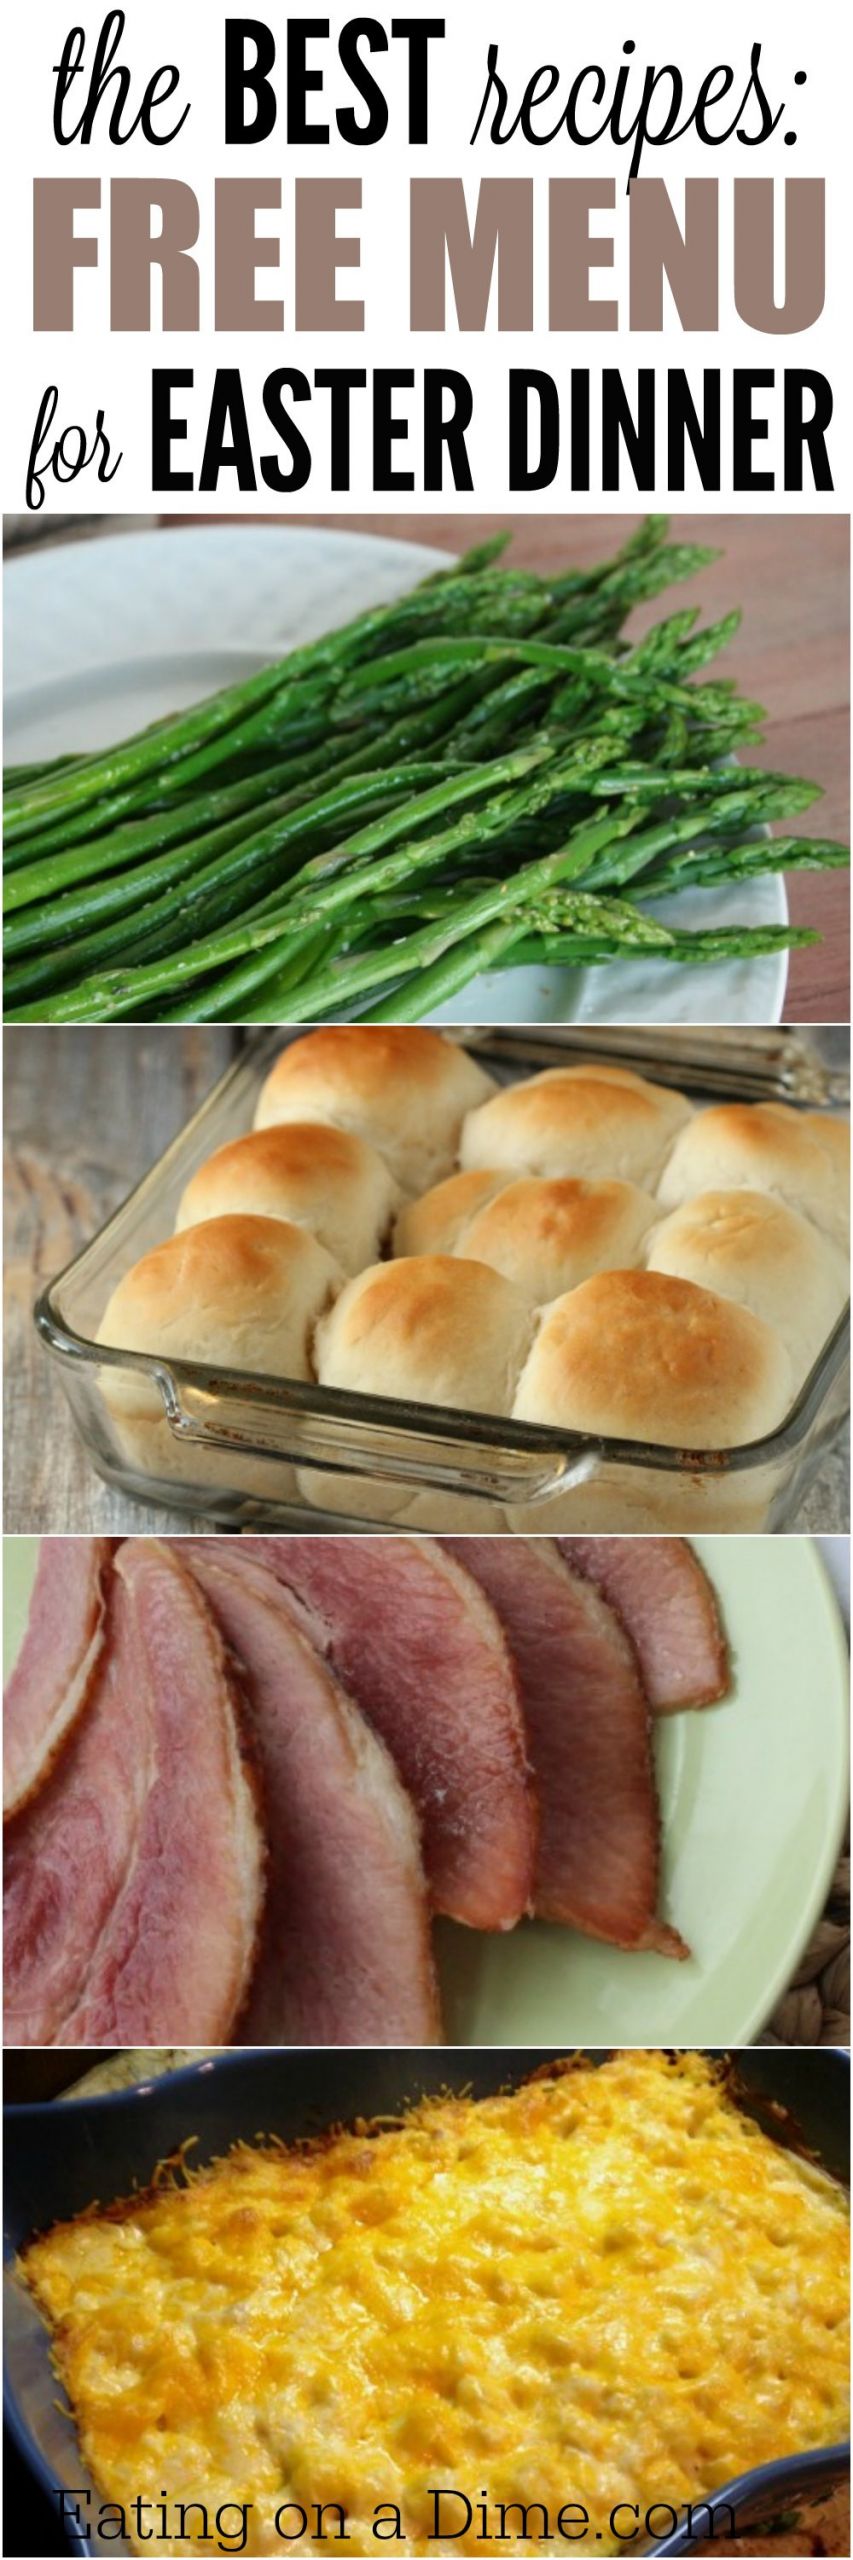 Menu For Easter Dinner
 Easter Menu Ideas and Recipes The Best Easter Dinner recipes